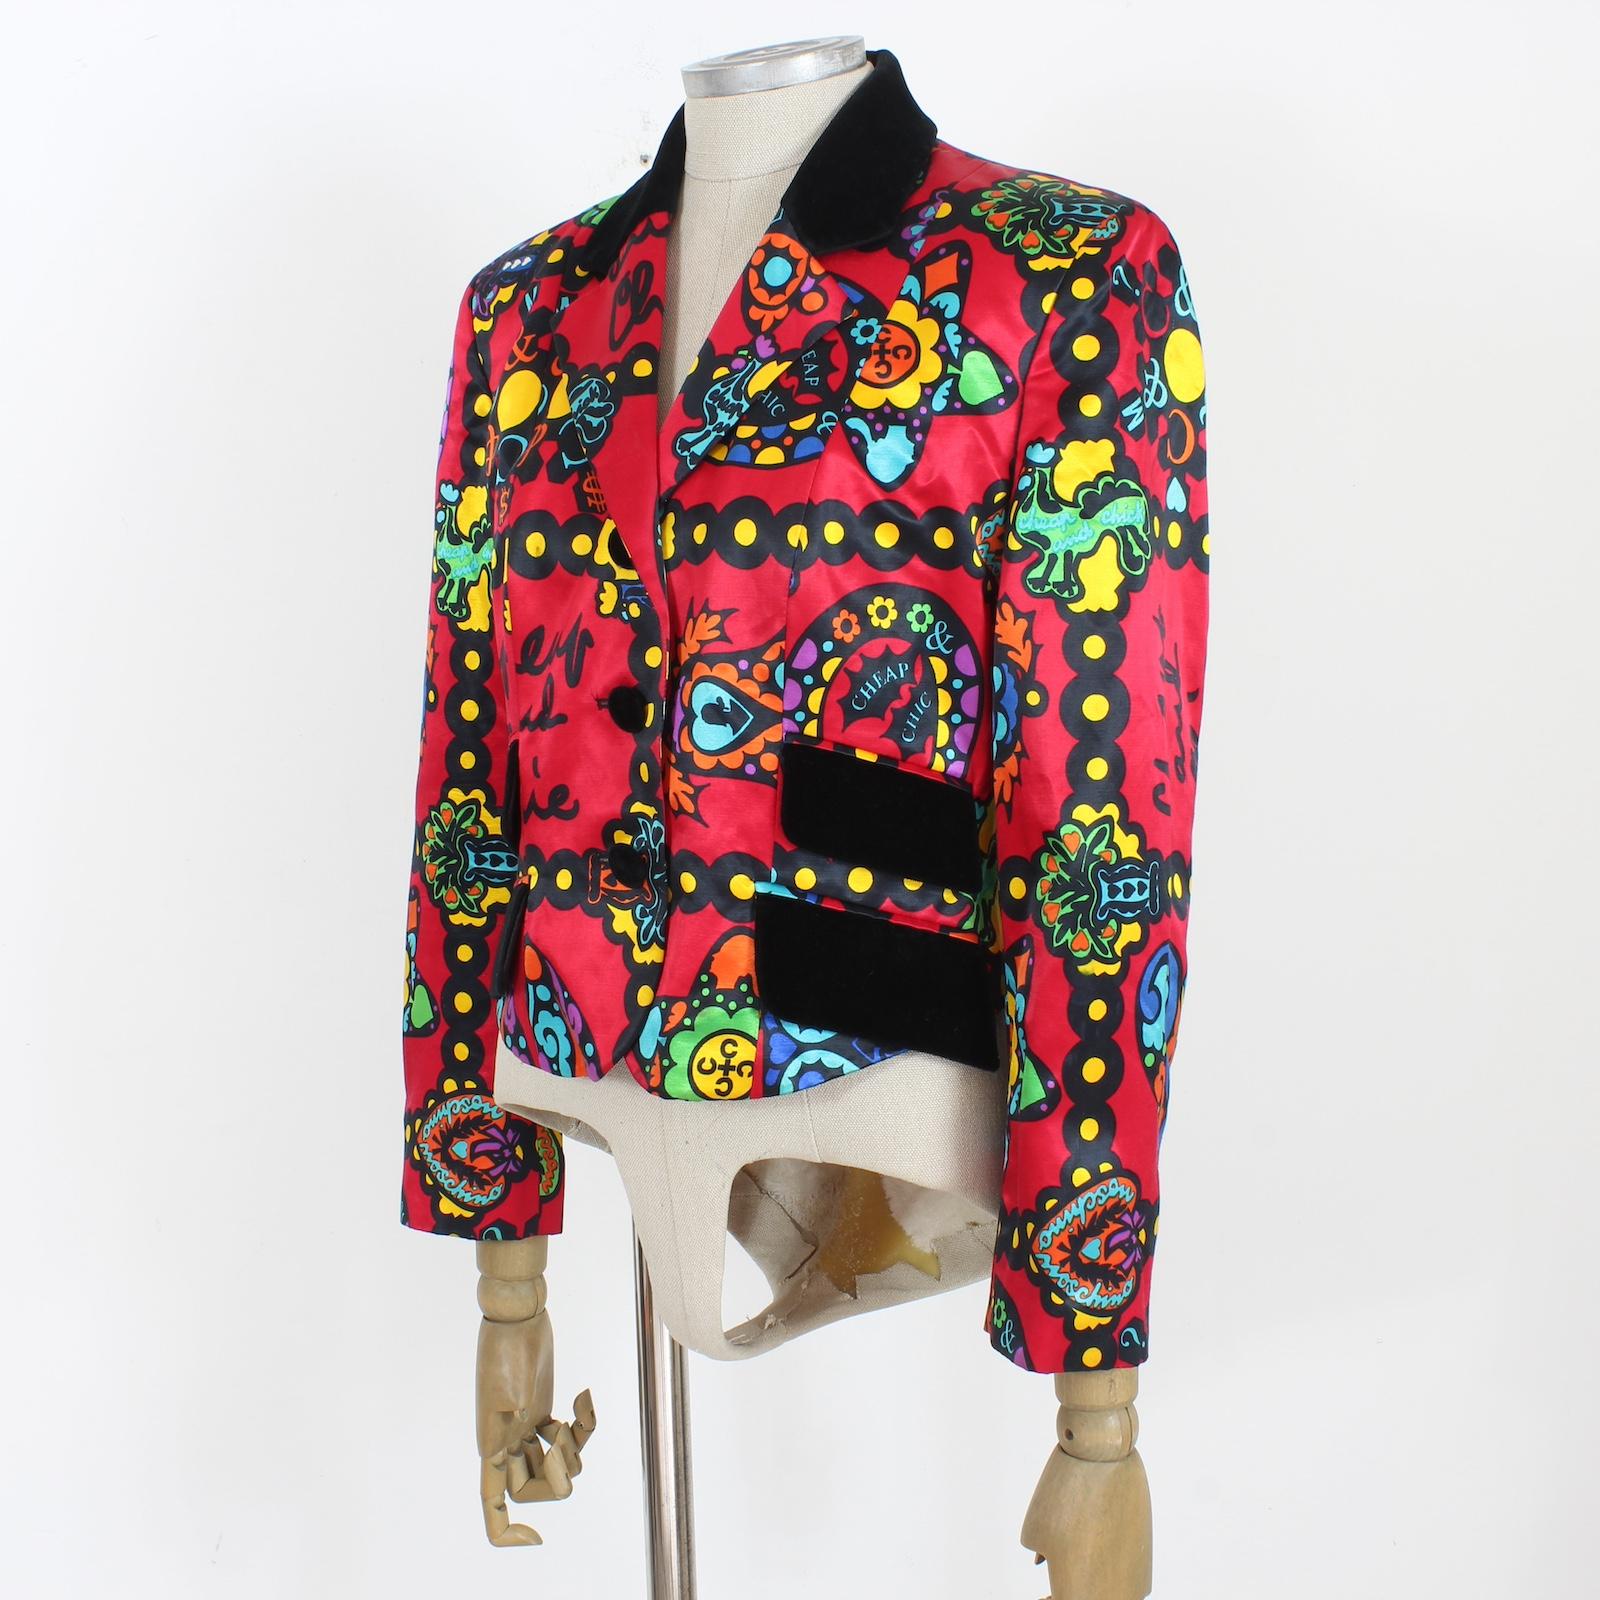 Moschino Cheap and Chic Red Iconic Short Blazer Jacket Vintage 1990s 1